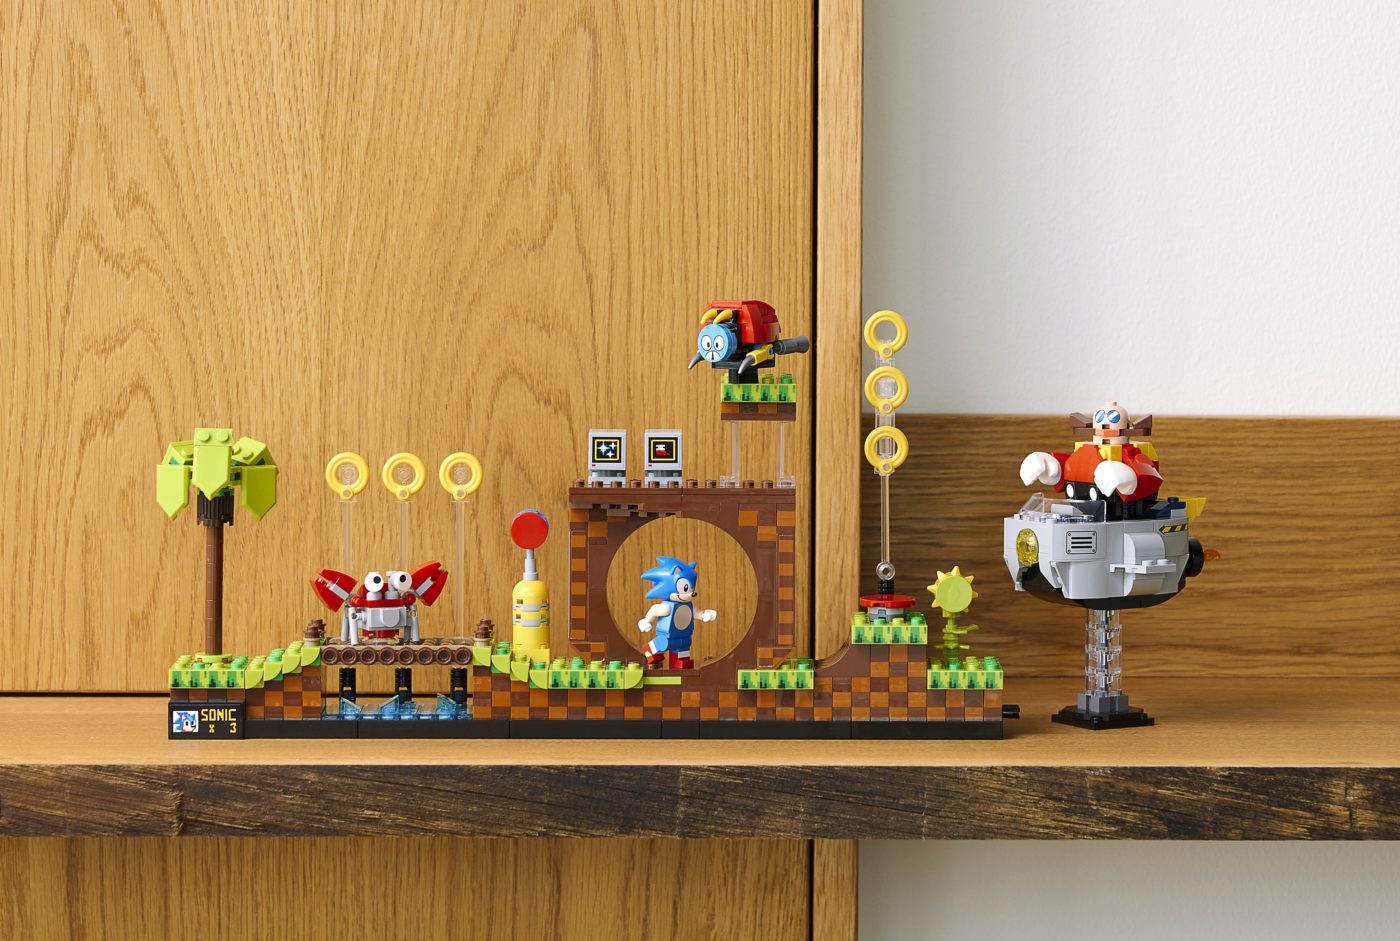 21331 Sonic the Hedgehog Green Hill Zone Display